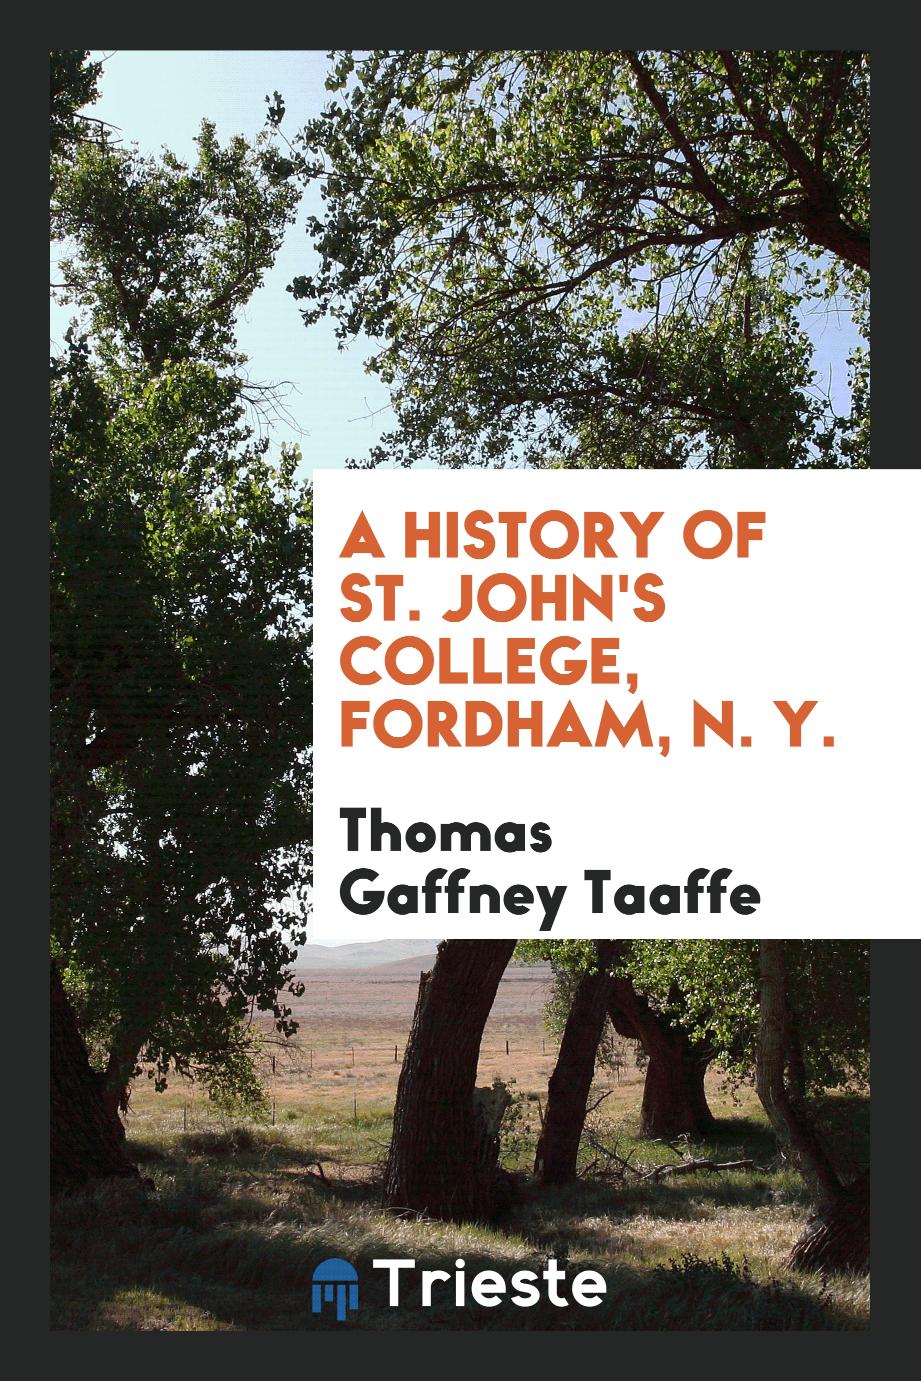 A history of St. John's college, Fordham, N. Y.